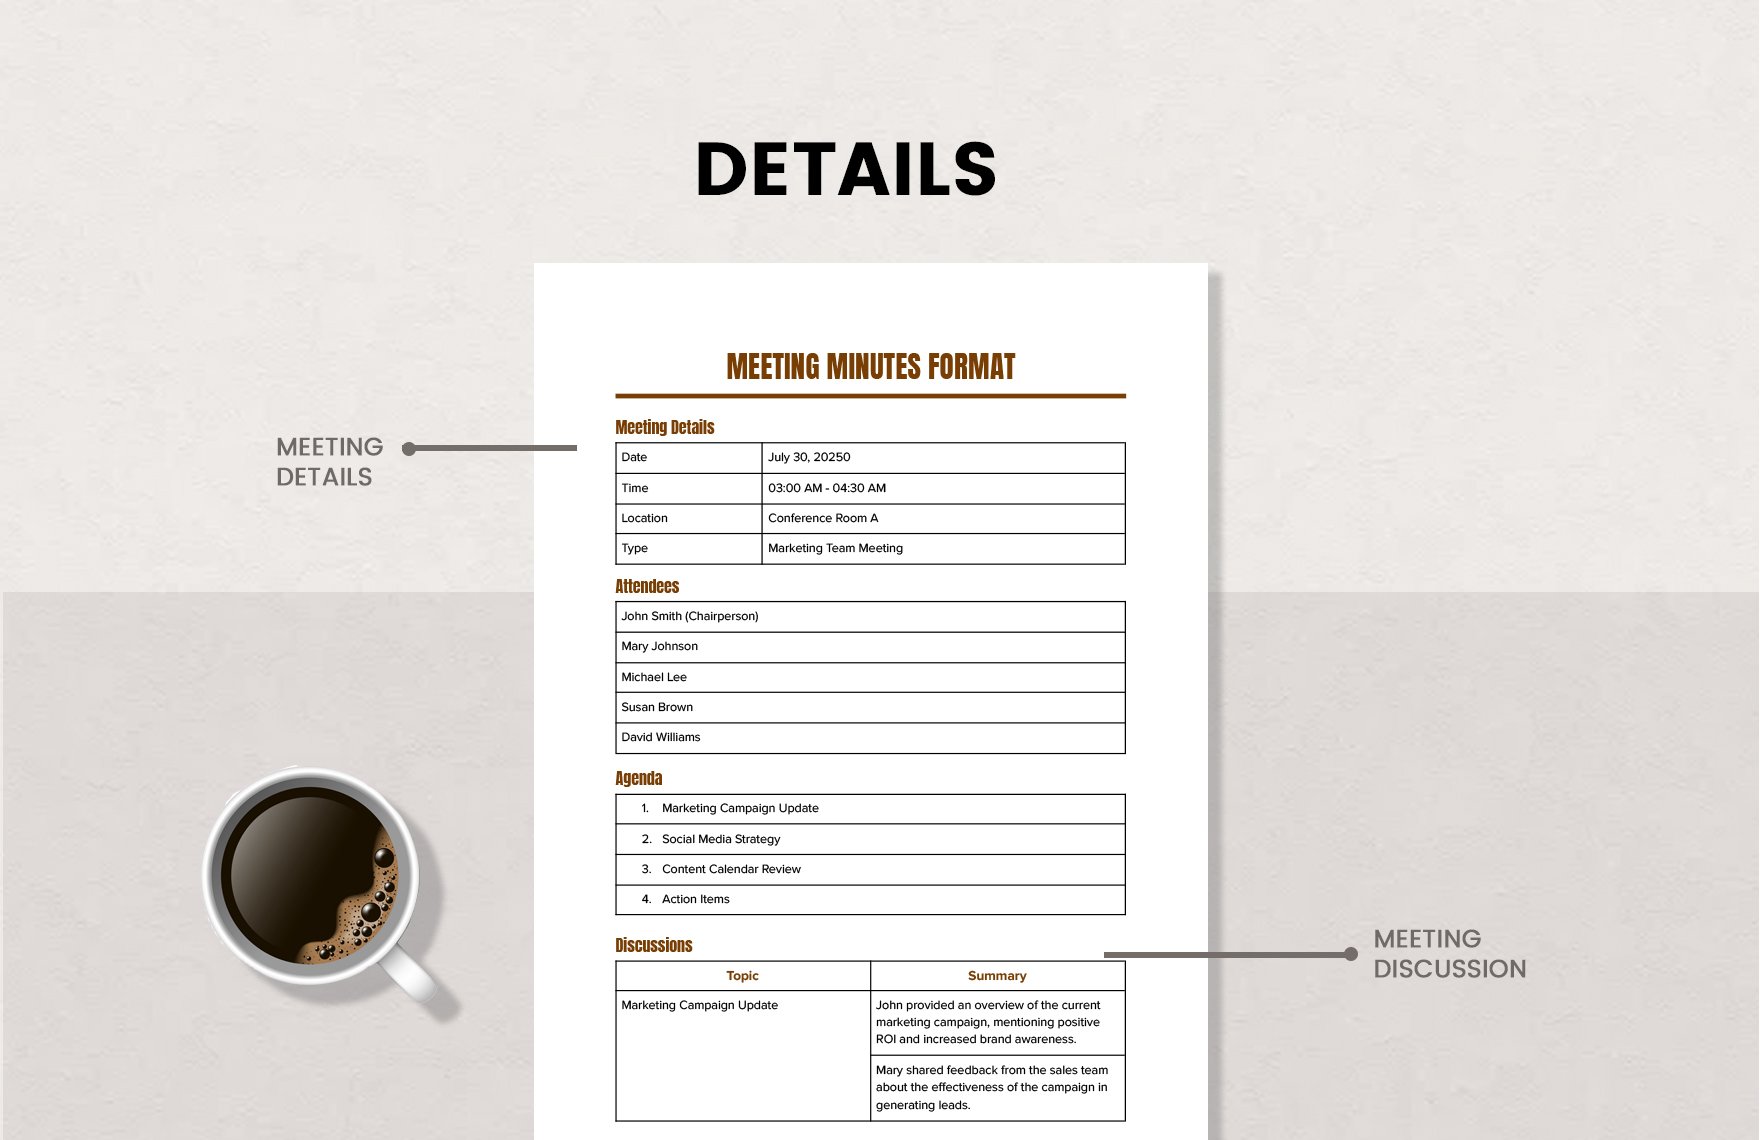 Meeting Minutes Format Template 